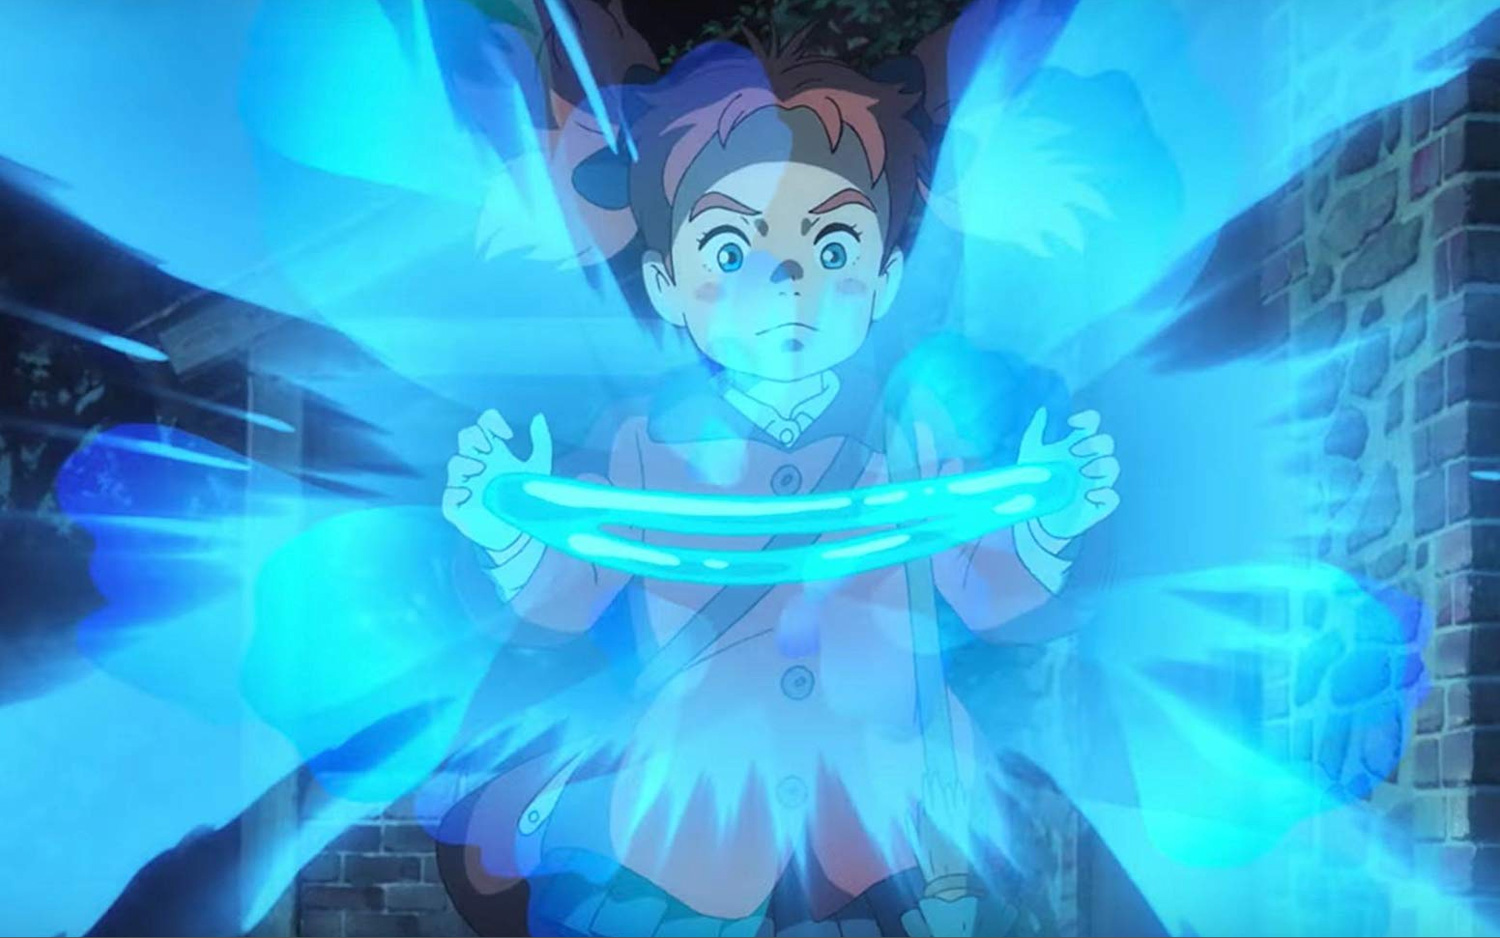 Best family movies on Netflix - mary and the witch's flower